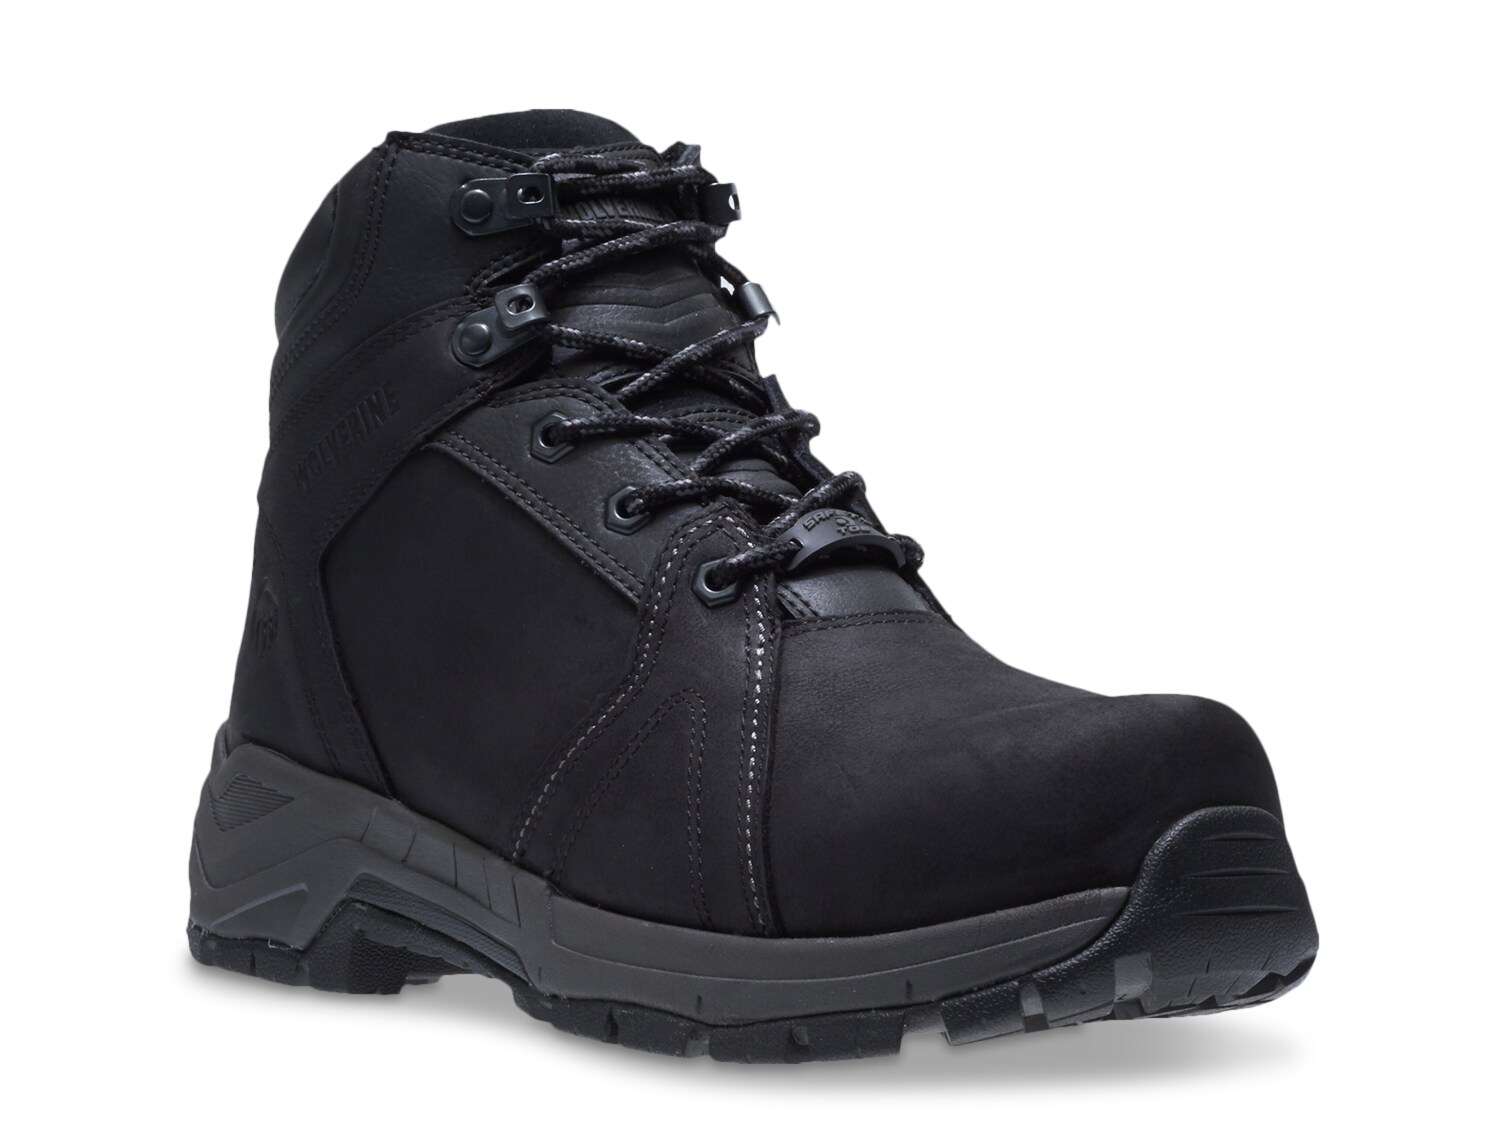 Wolverine Contractor EPX CarbonMAX Toe Work Boot - Free Shipping | DSW